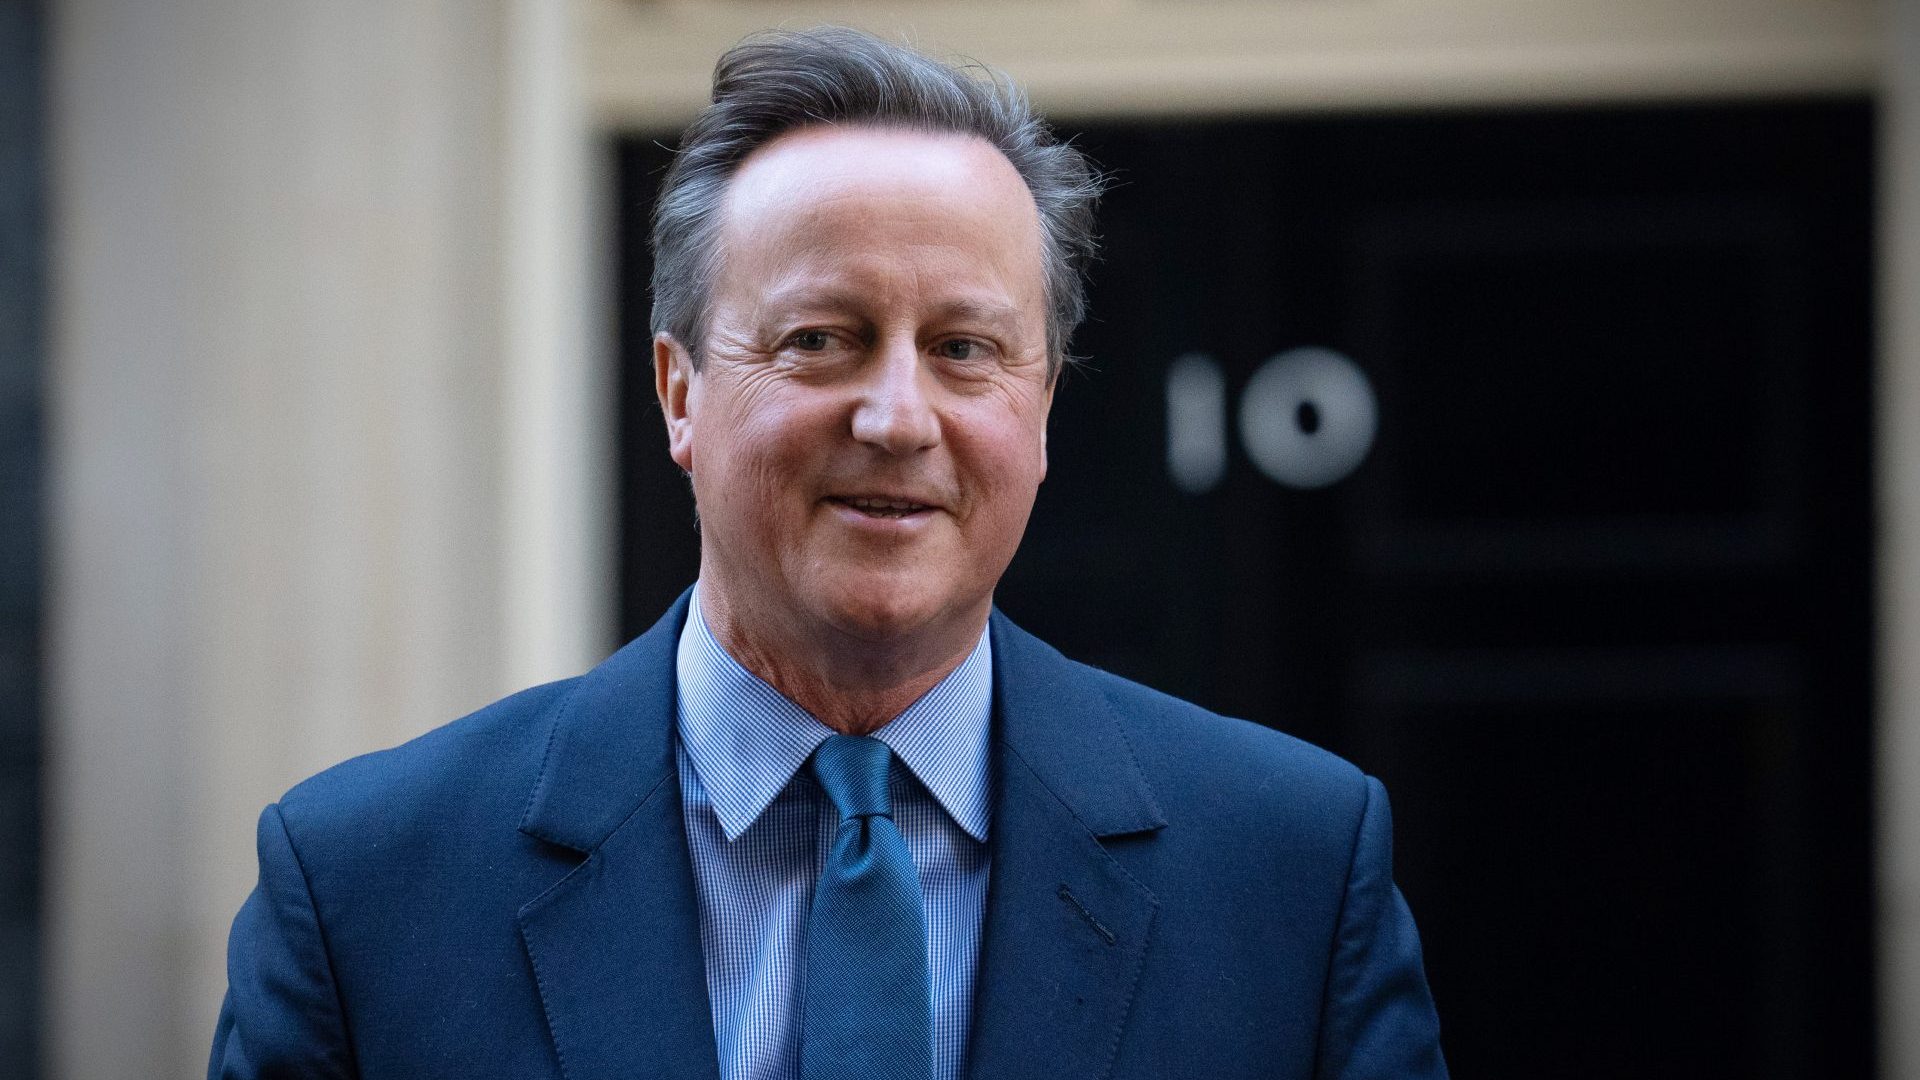 Britain's former Prime Minister, David Cameron, leaves 10, Downing Street after being appointed Foreign Secretary. Photo: Carl Court/Getty Images